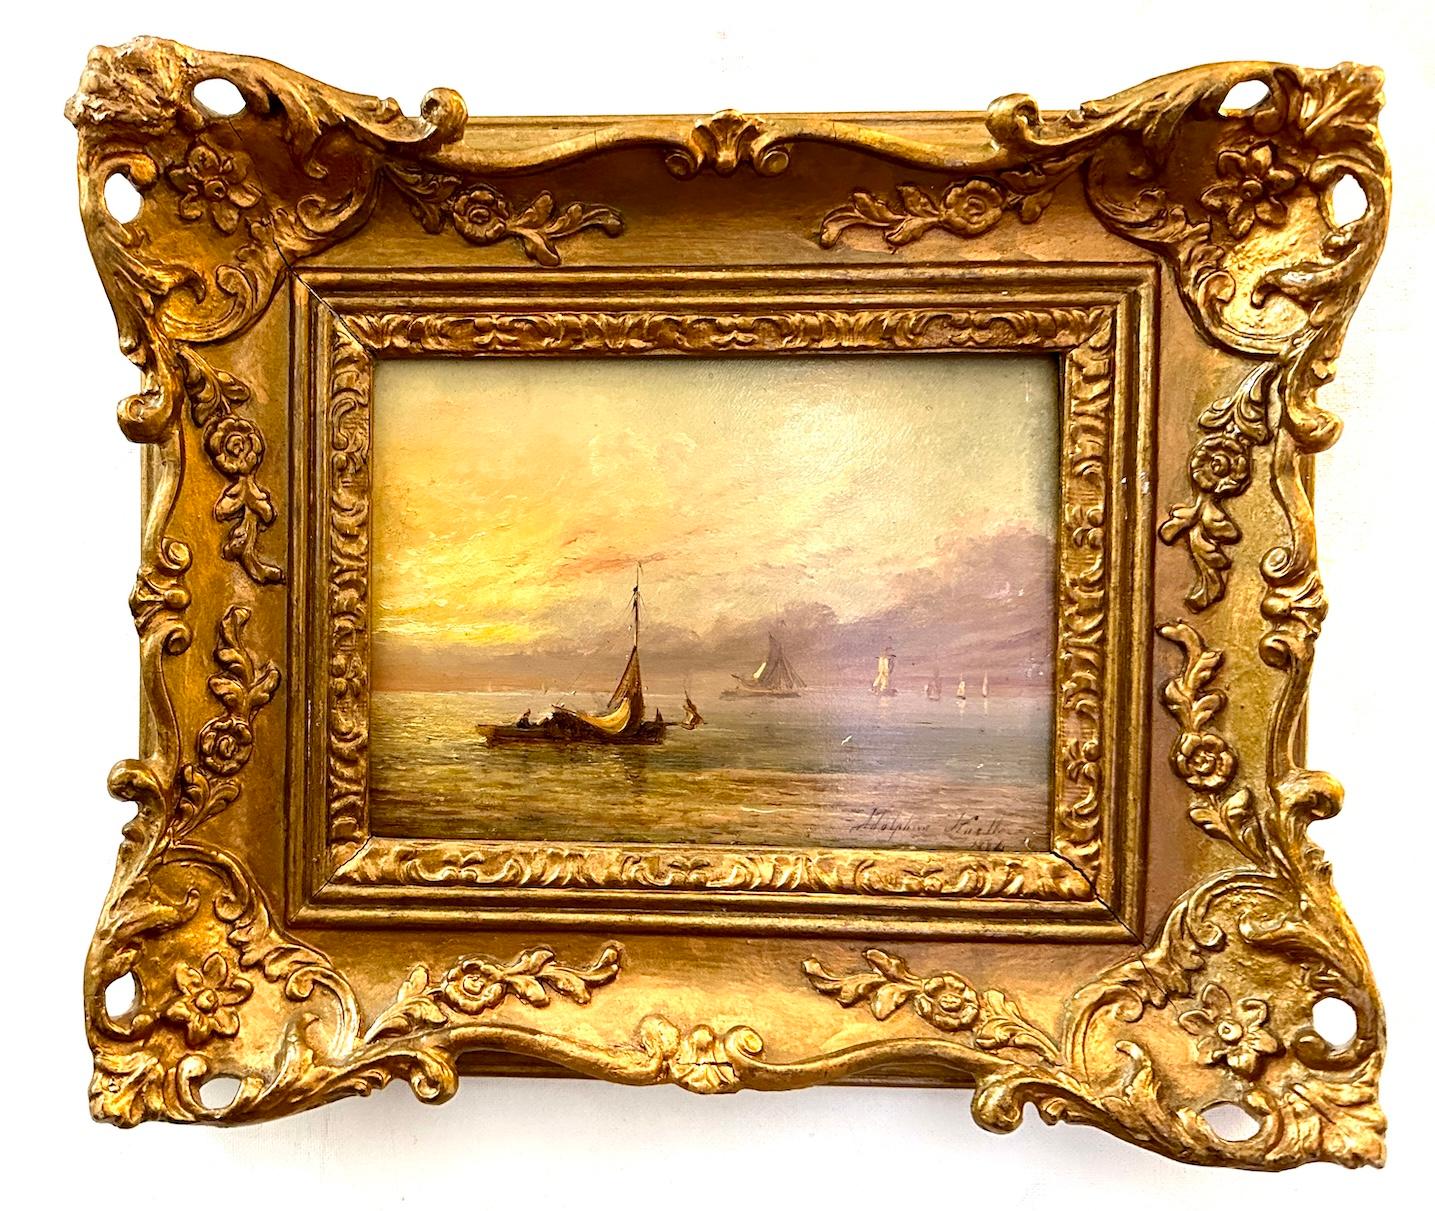 Adolphus Knell Landscape Painting - 19th century English Fishing boat at sea with Sun rise or Sunset